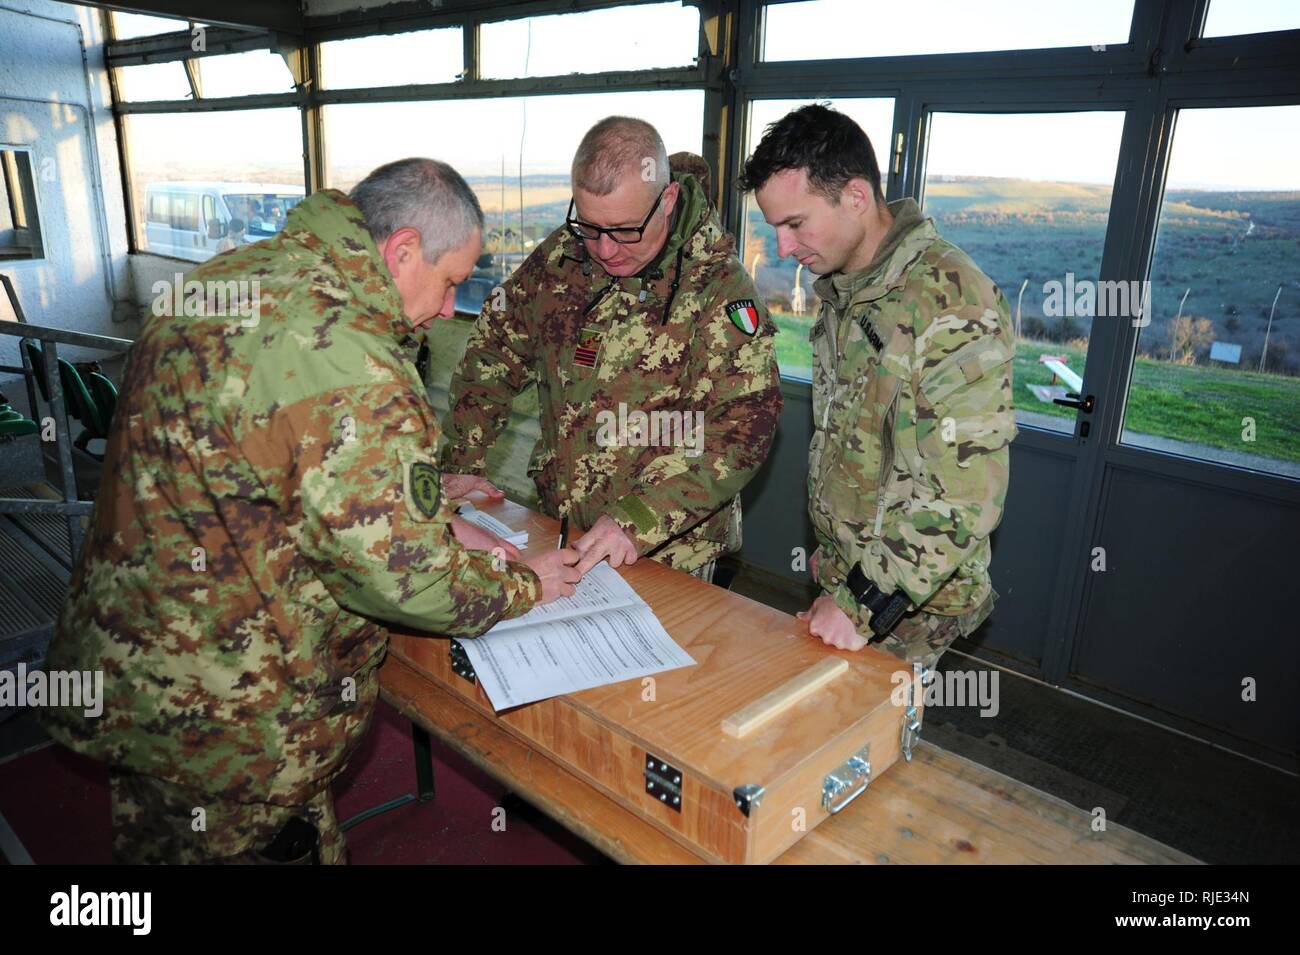 From left, Italian Army 1st Lgt. Giulio Fabbri, Director of Monte Romano Training Area, Italian Army Sgm. Massimo Giordano, liaison officer USA SETAF G3 Vicenza and 1st Lt. Jonathan P. MesserJan, plan the activity during the Exercise Baree  Jan. 18, 2018, Monte Romano training area, Italy. ( Stock Photo